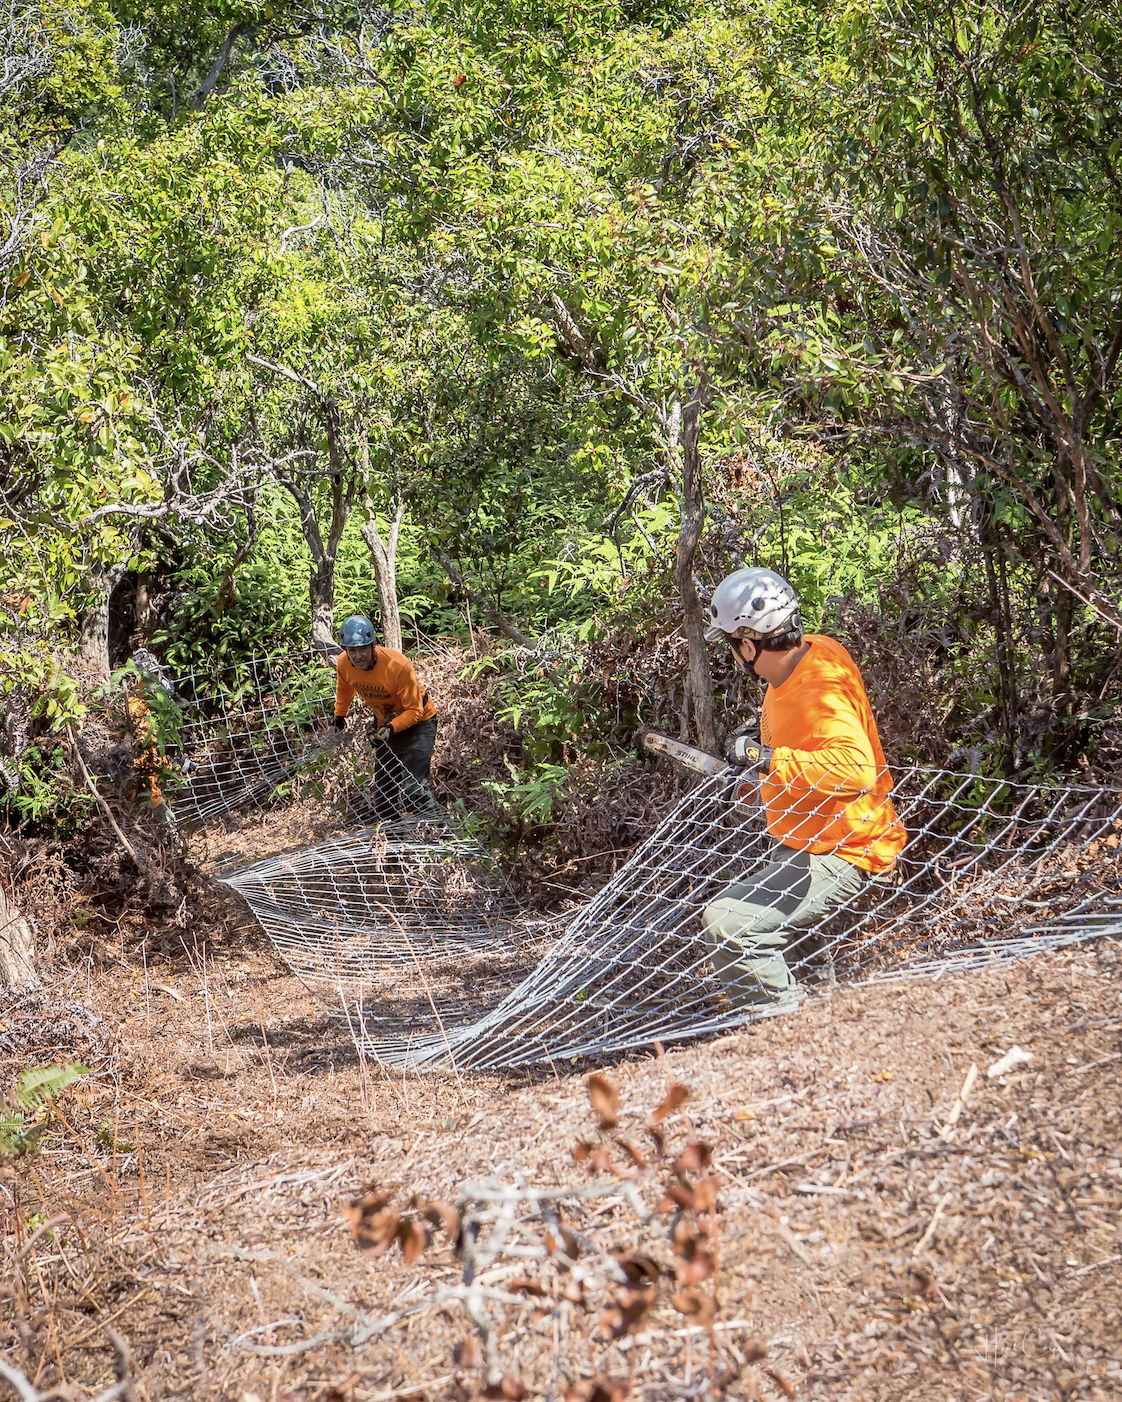 Puʻu Kukui Watershed Preserve team members working to protect the area's natural resources (courtesy of Herb & Dee Coyle).